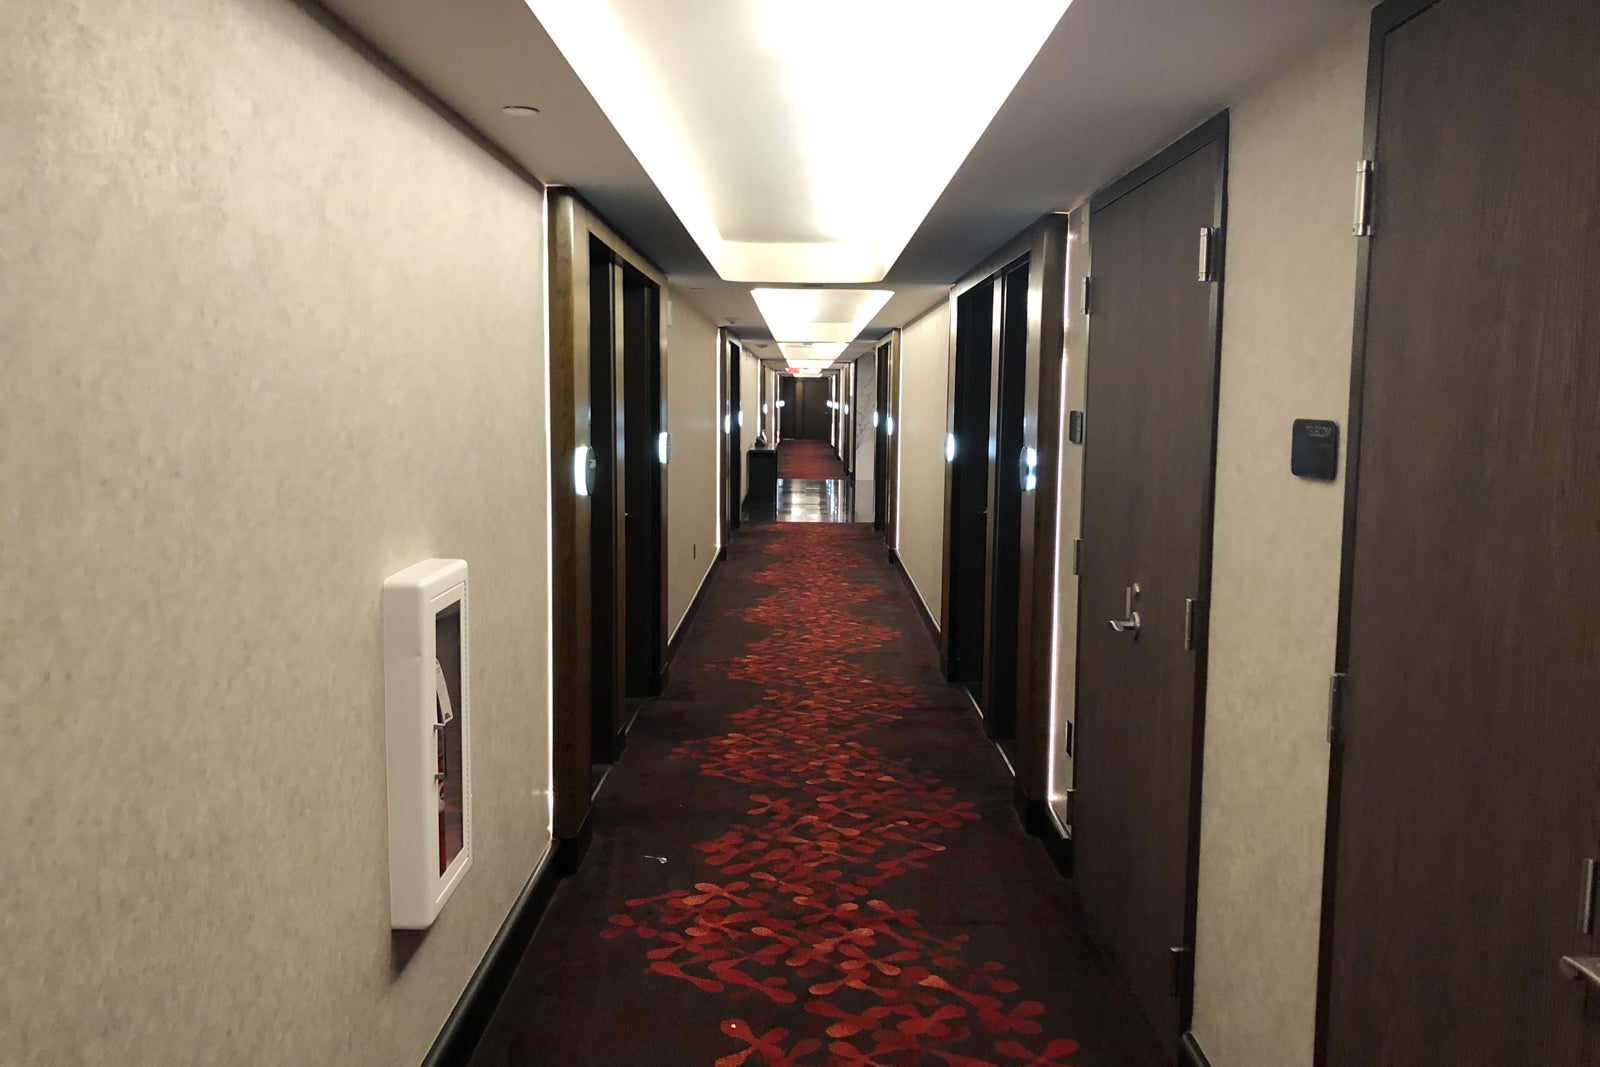 Midcentury modern details like curved ceiling accents and bold pops of red in the carpet greet you when you walk down the hall to The Watergate Hotel's Scandal Room.